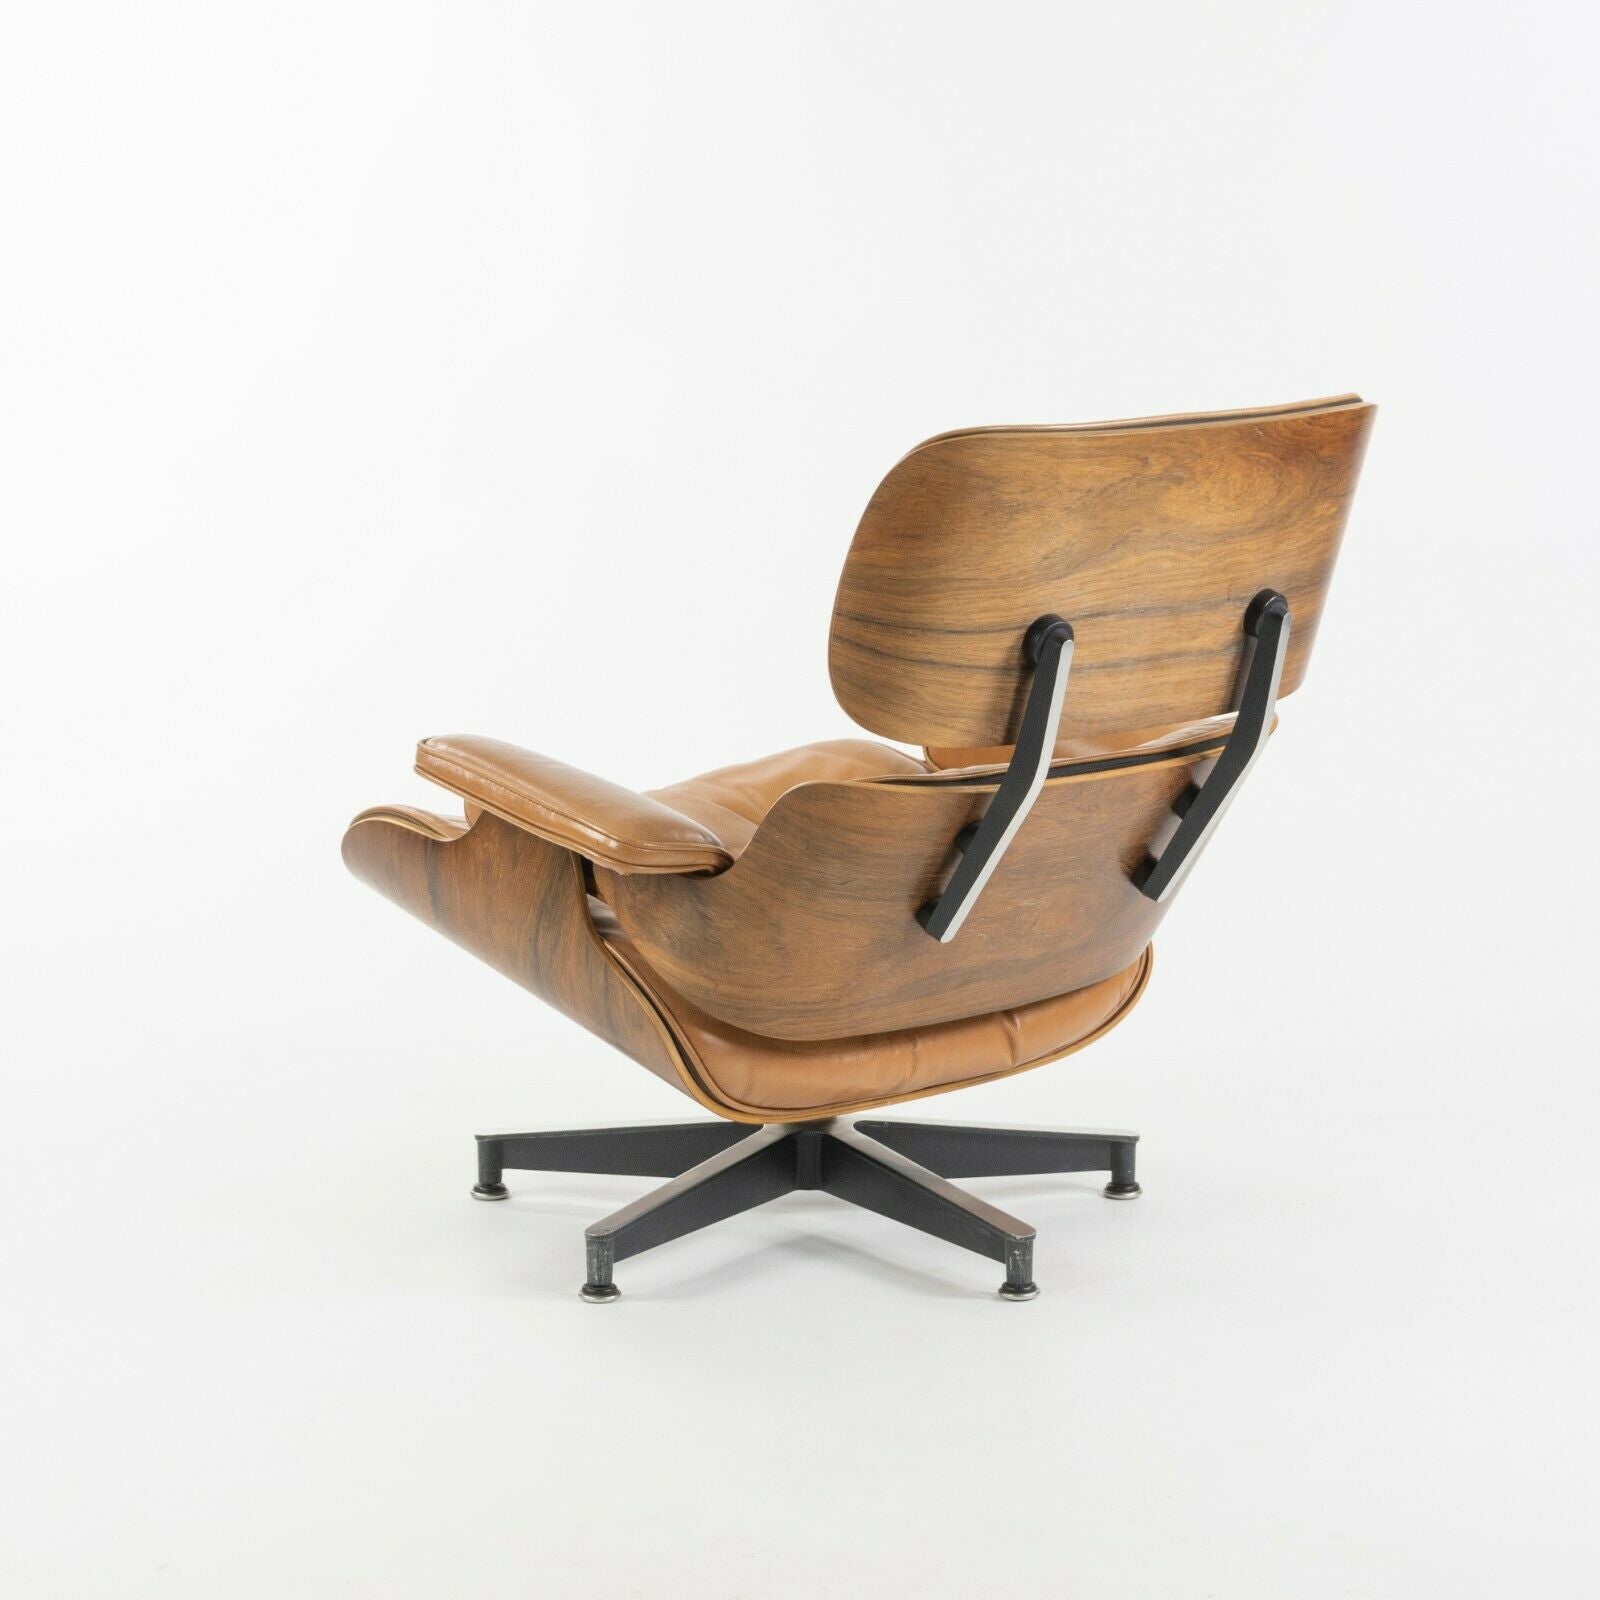 SOLD 1956 Herman Miller Eames Lounge Chair and Ottoman 670 671 with Boot Glides Tan